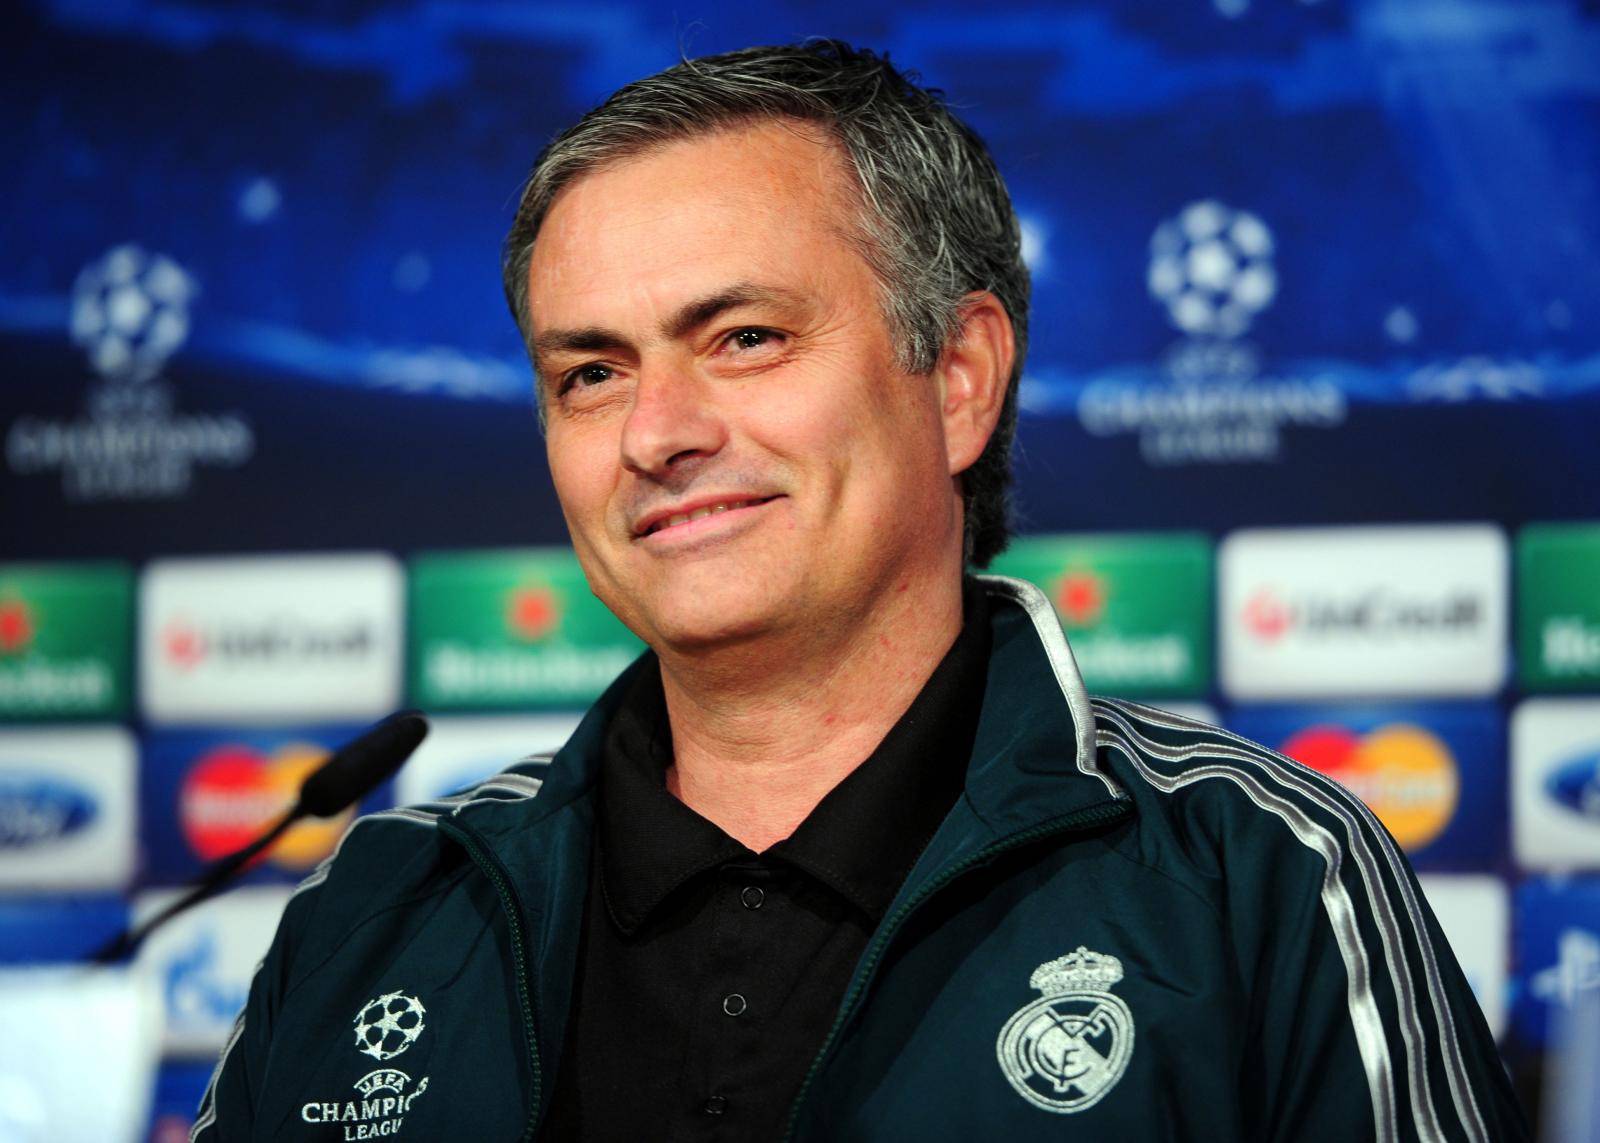 Soccer - UEFA Champions League - Round of Sixteen - Real Madrid v Manchester United - Real Madrid Press Conference - Santiago Bernabeu